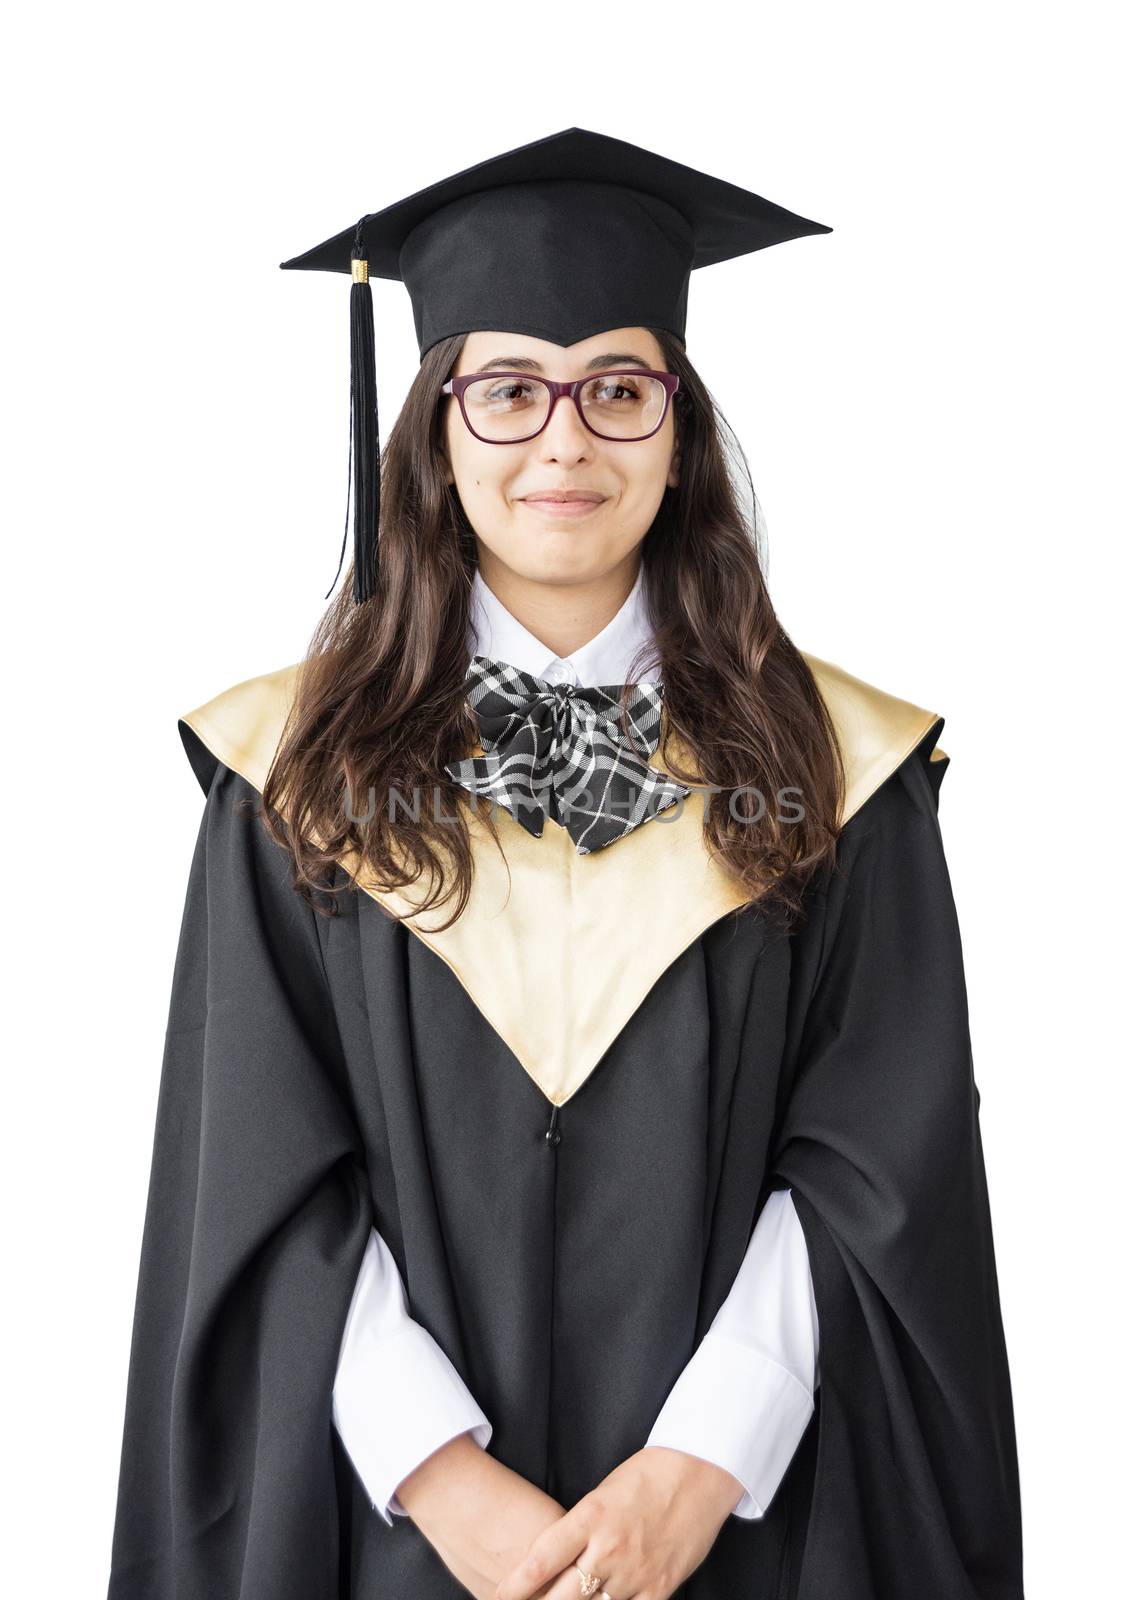 Young girl graduate of the University with glasses, academic cap and black gown, standing isolated on white background